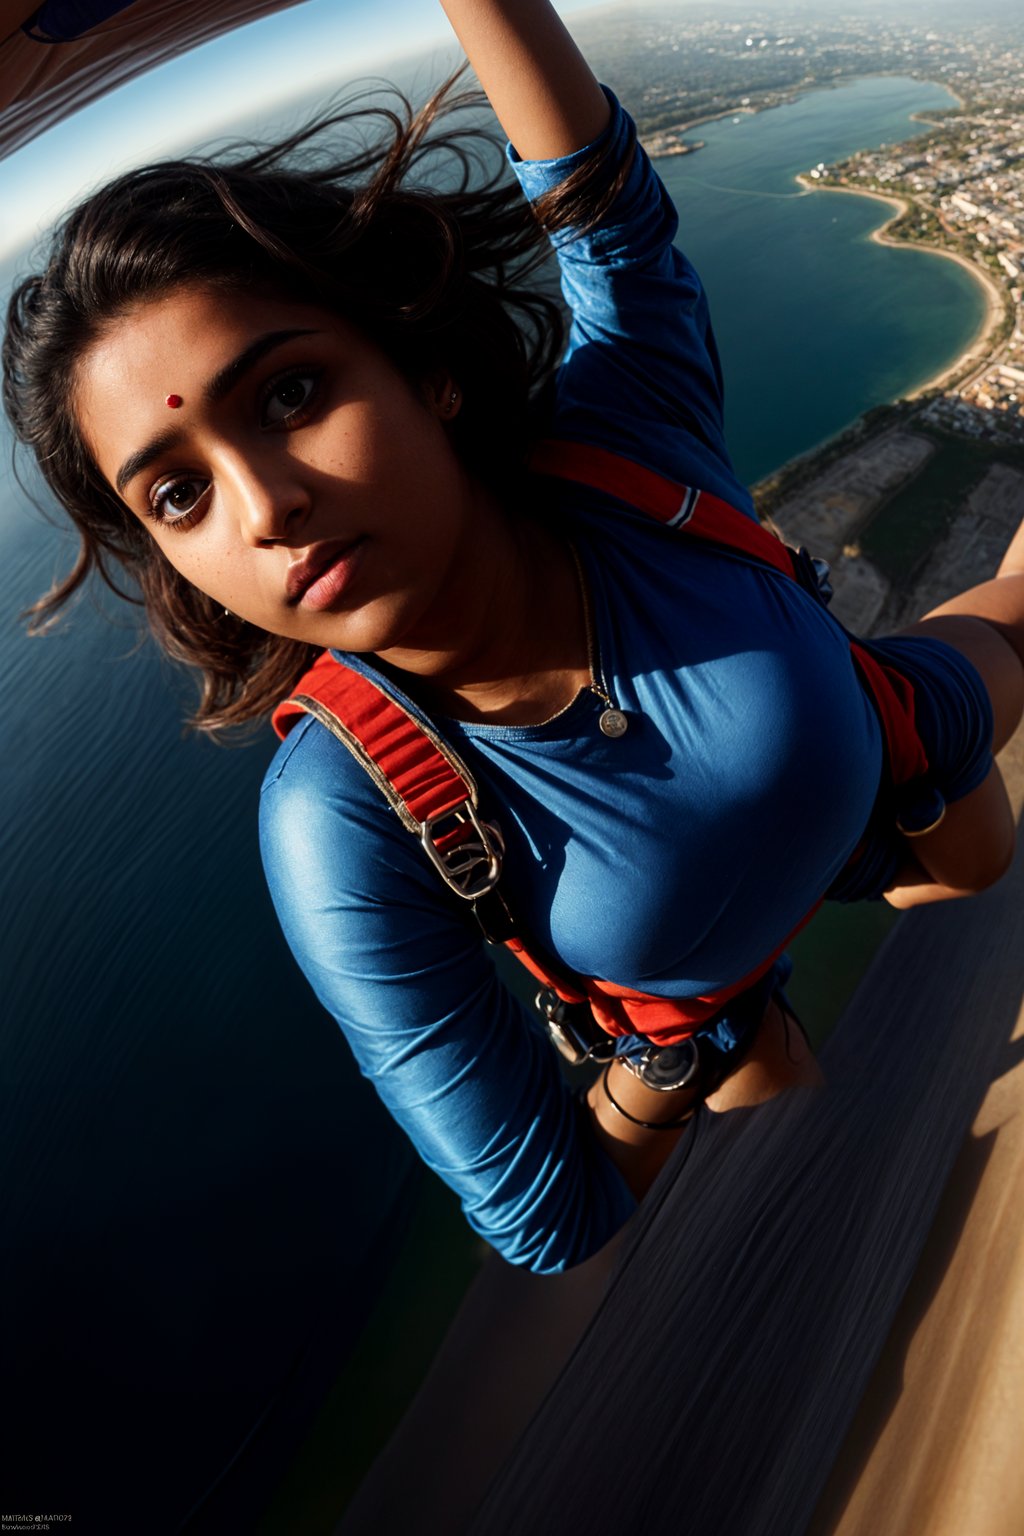 woman skydiving in the air